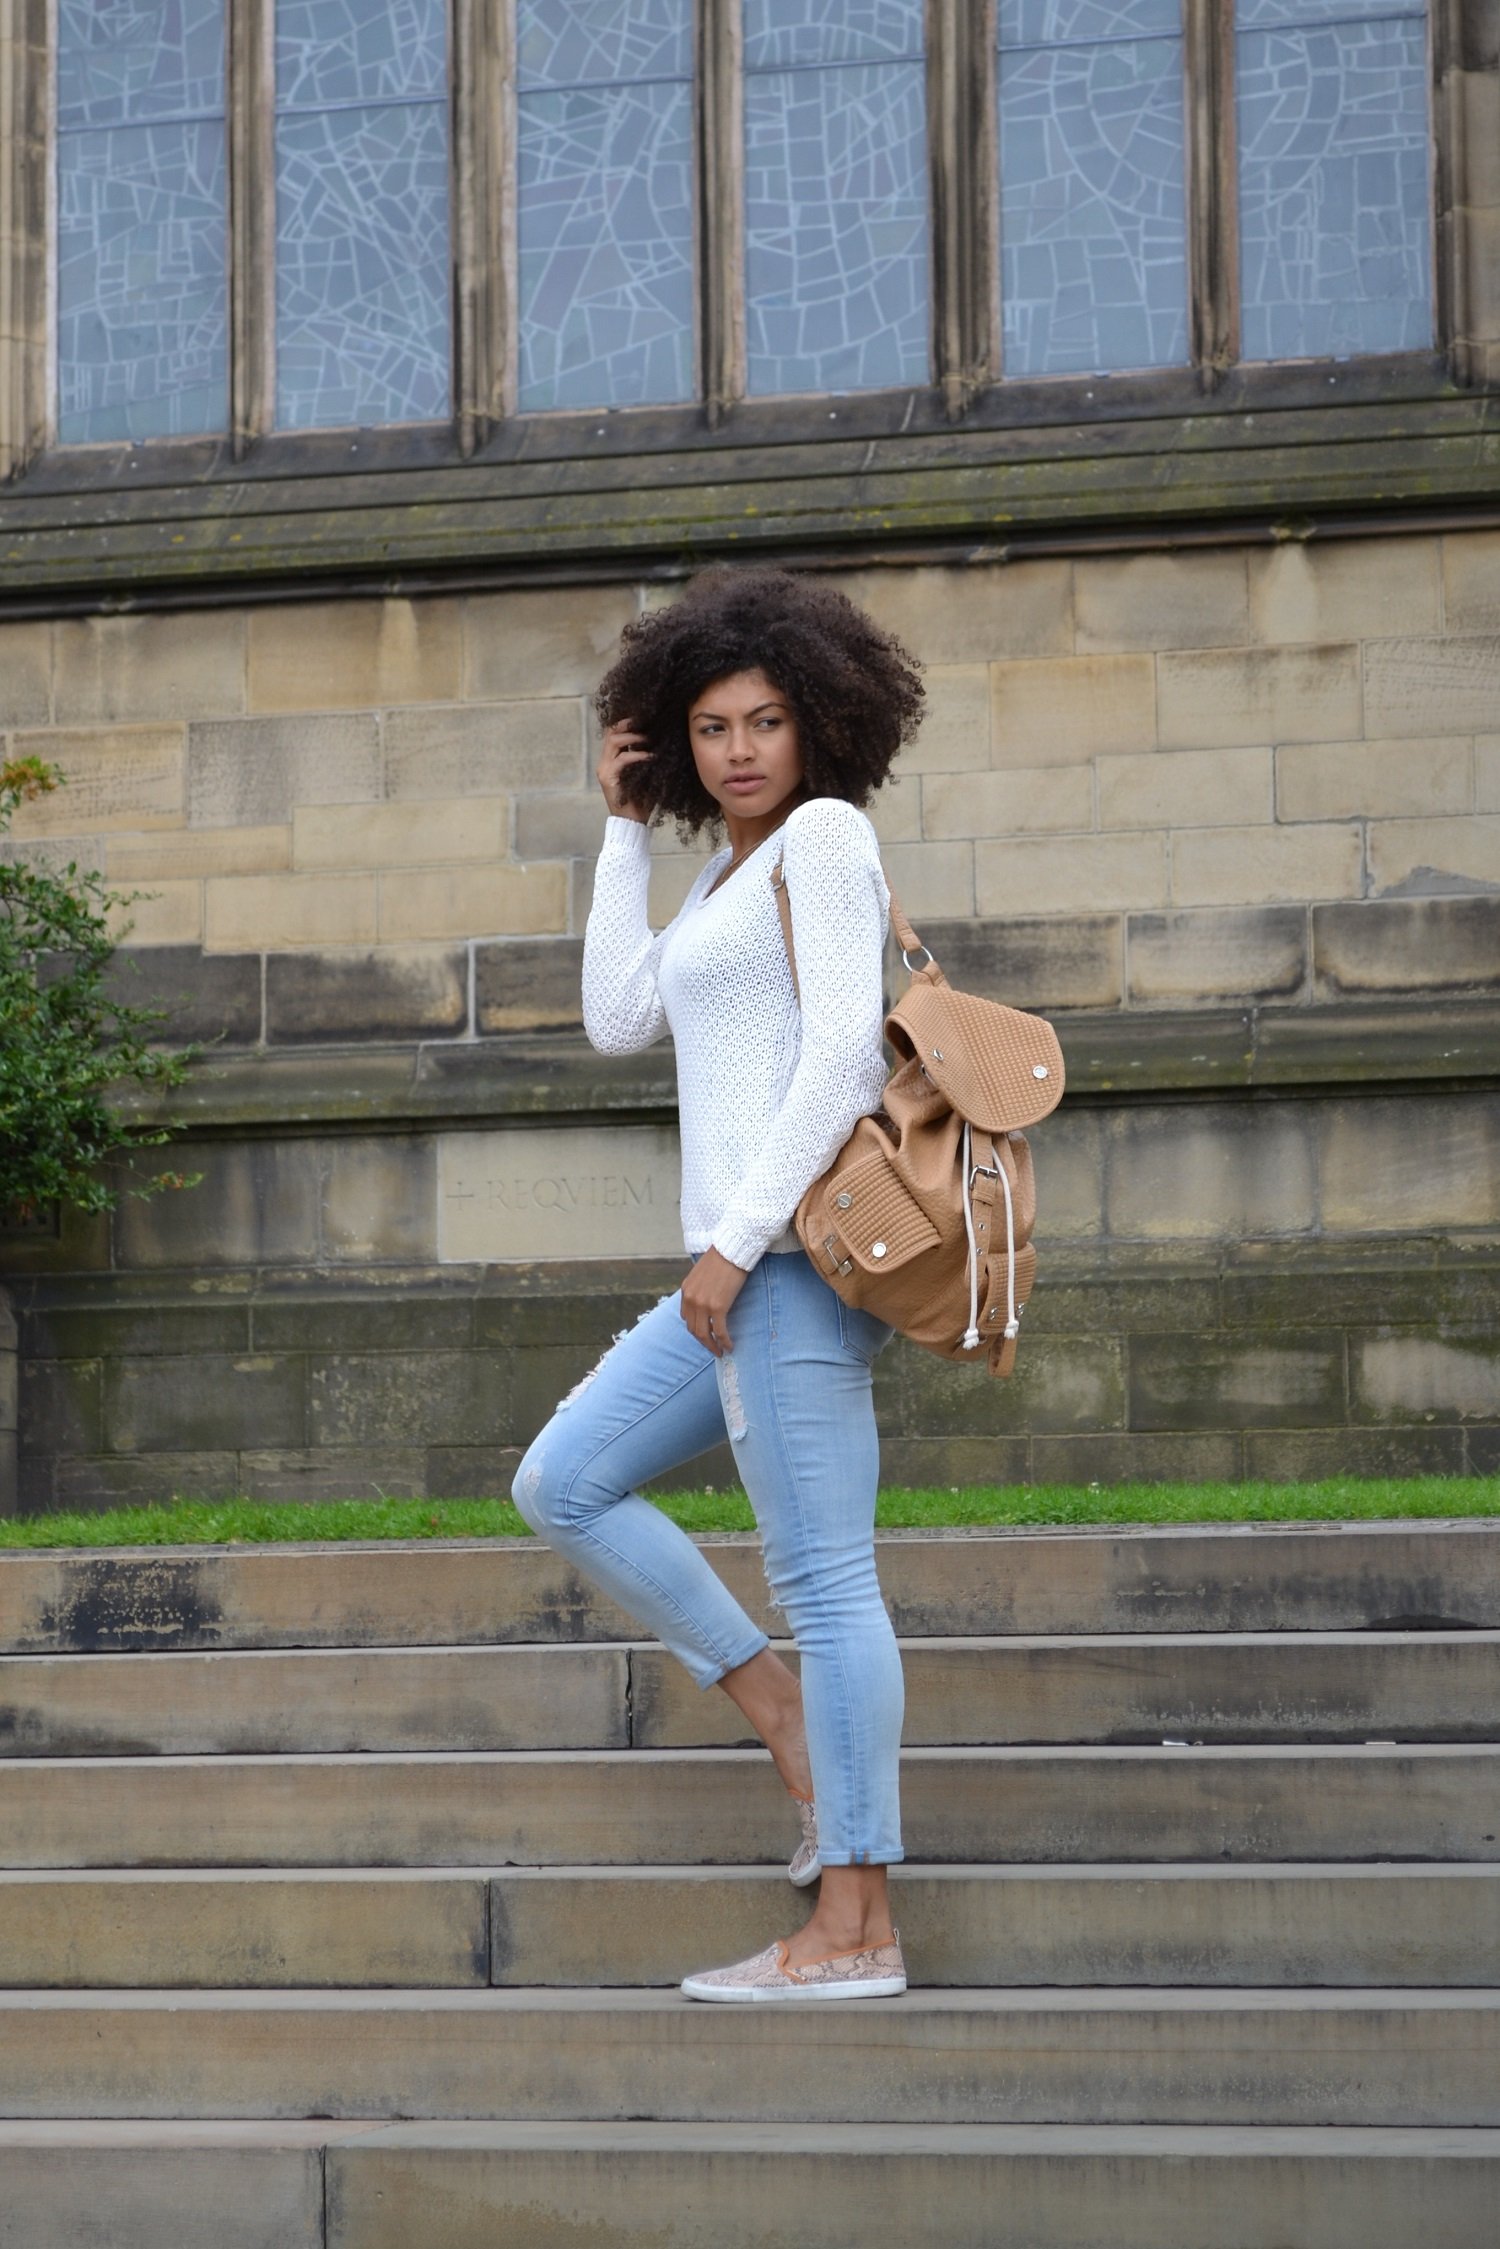 Samio wearing white Gap jumper and denim jeans with brown faux leather River Island backpack